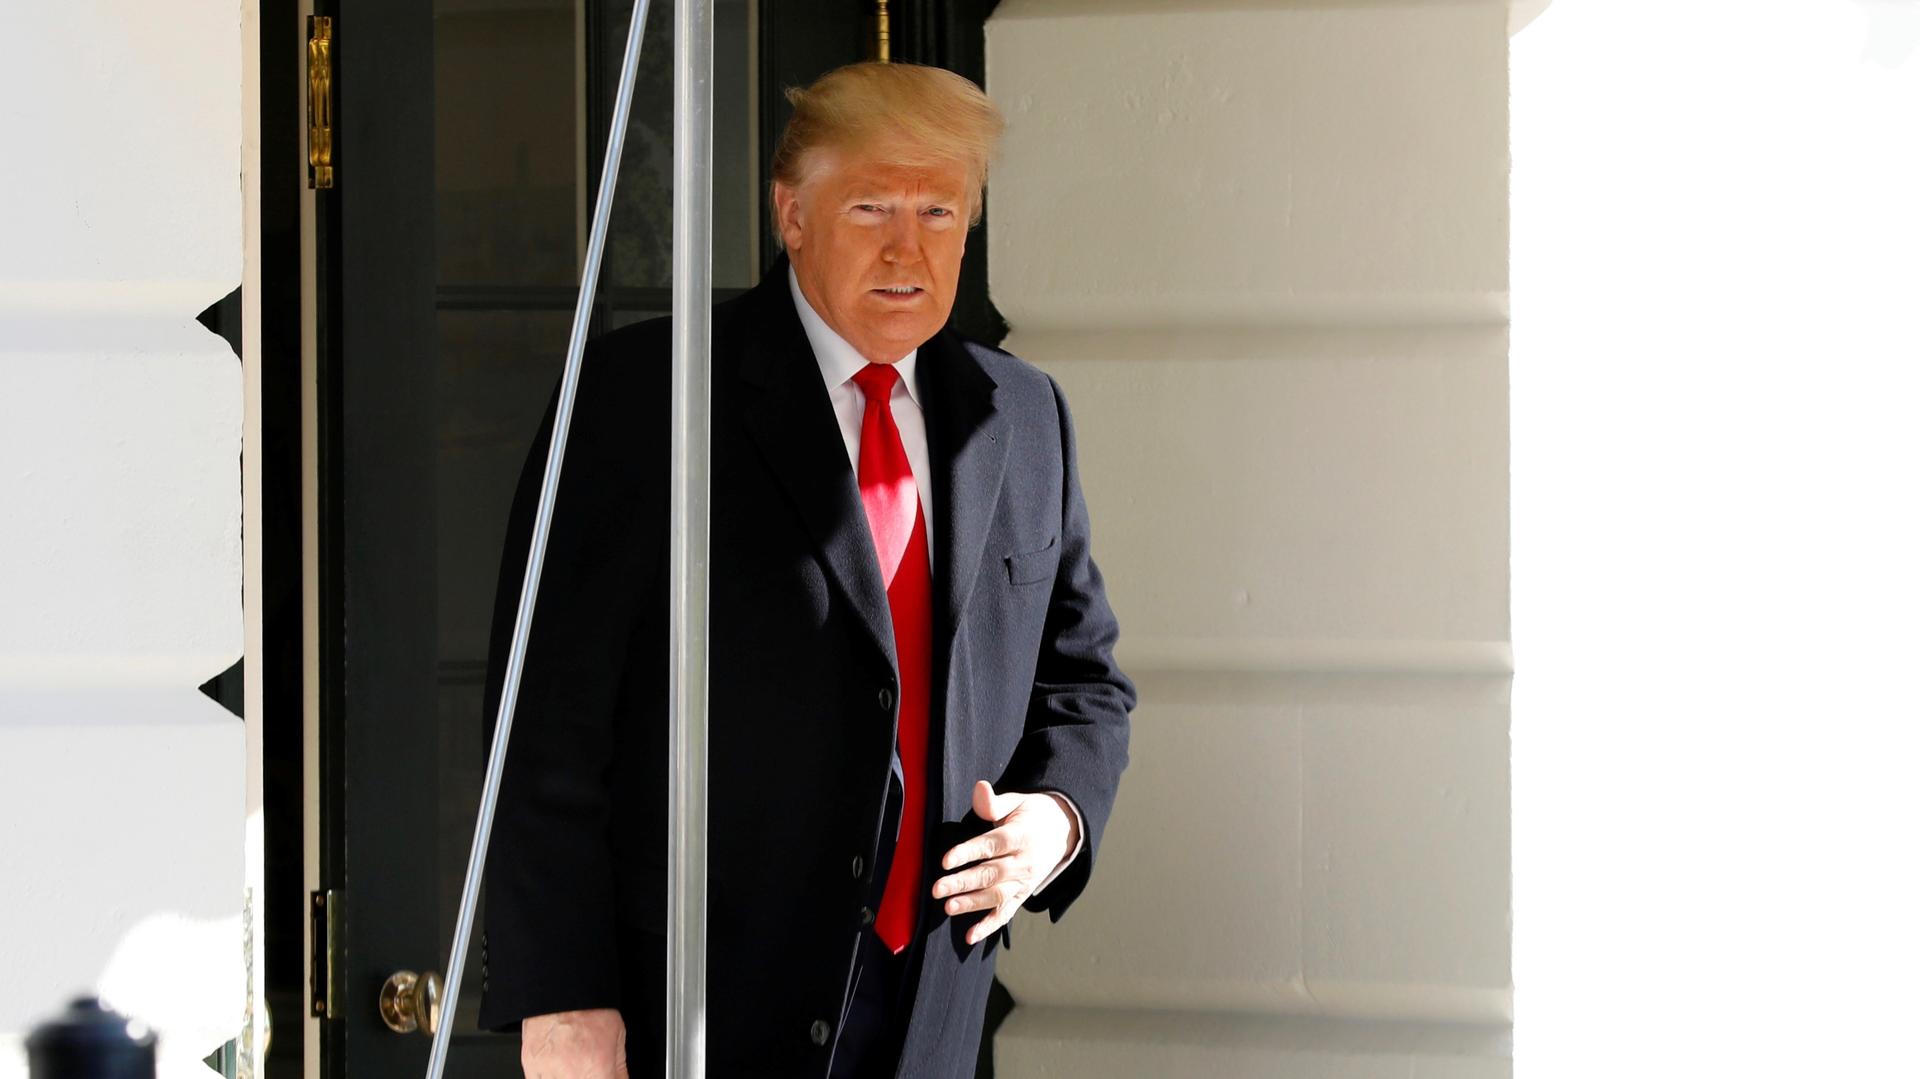 US President Donald Trump walks out from the the White House in Washington before his departure to India, Feb. 23, 2020.